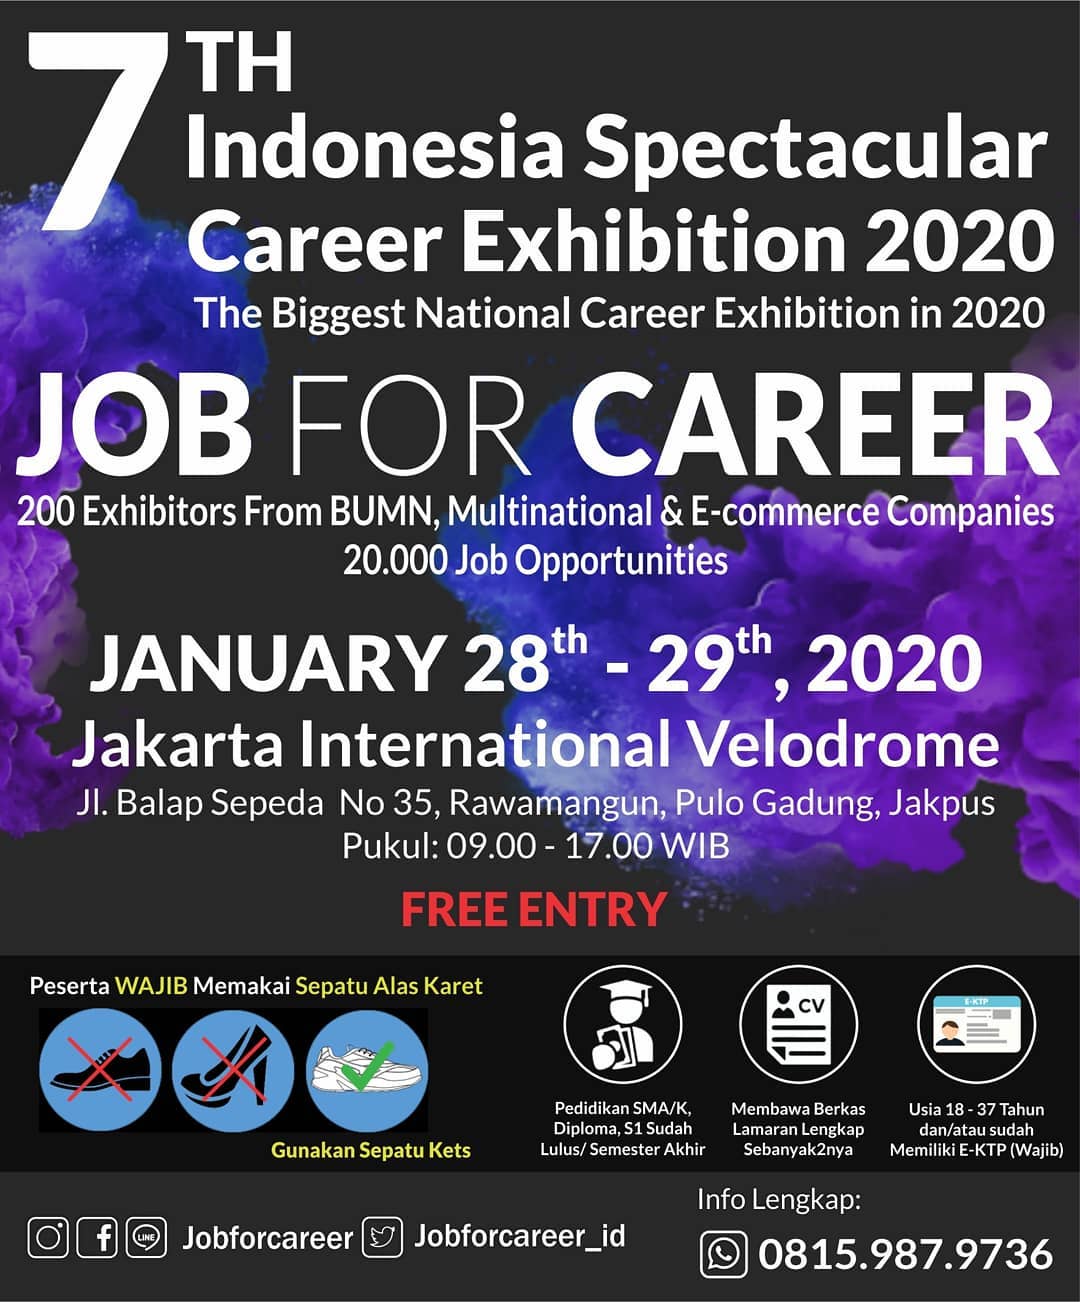 The 7Th Indonesia Spectacular Startup & Career Exhibition â€œJOB FOR CAREERâ€